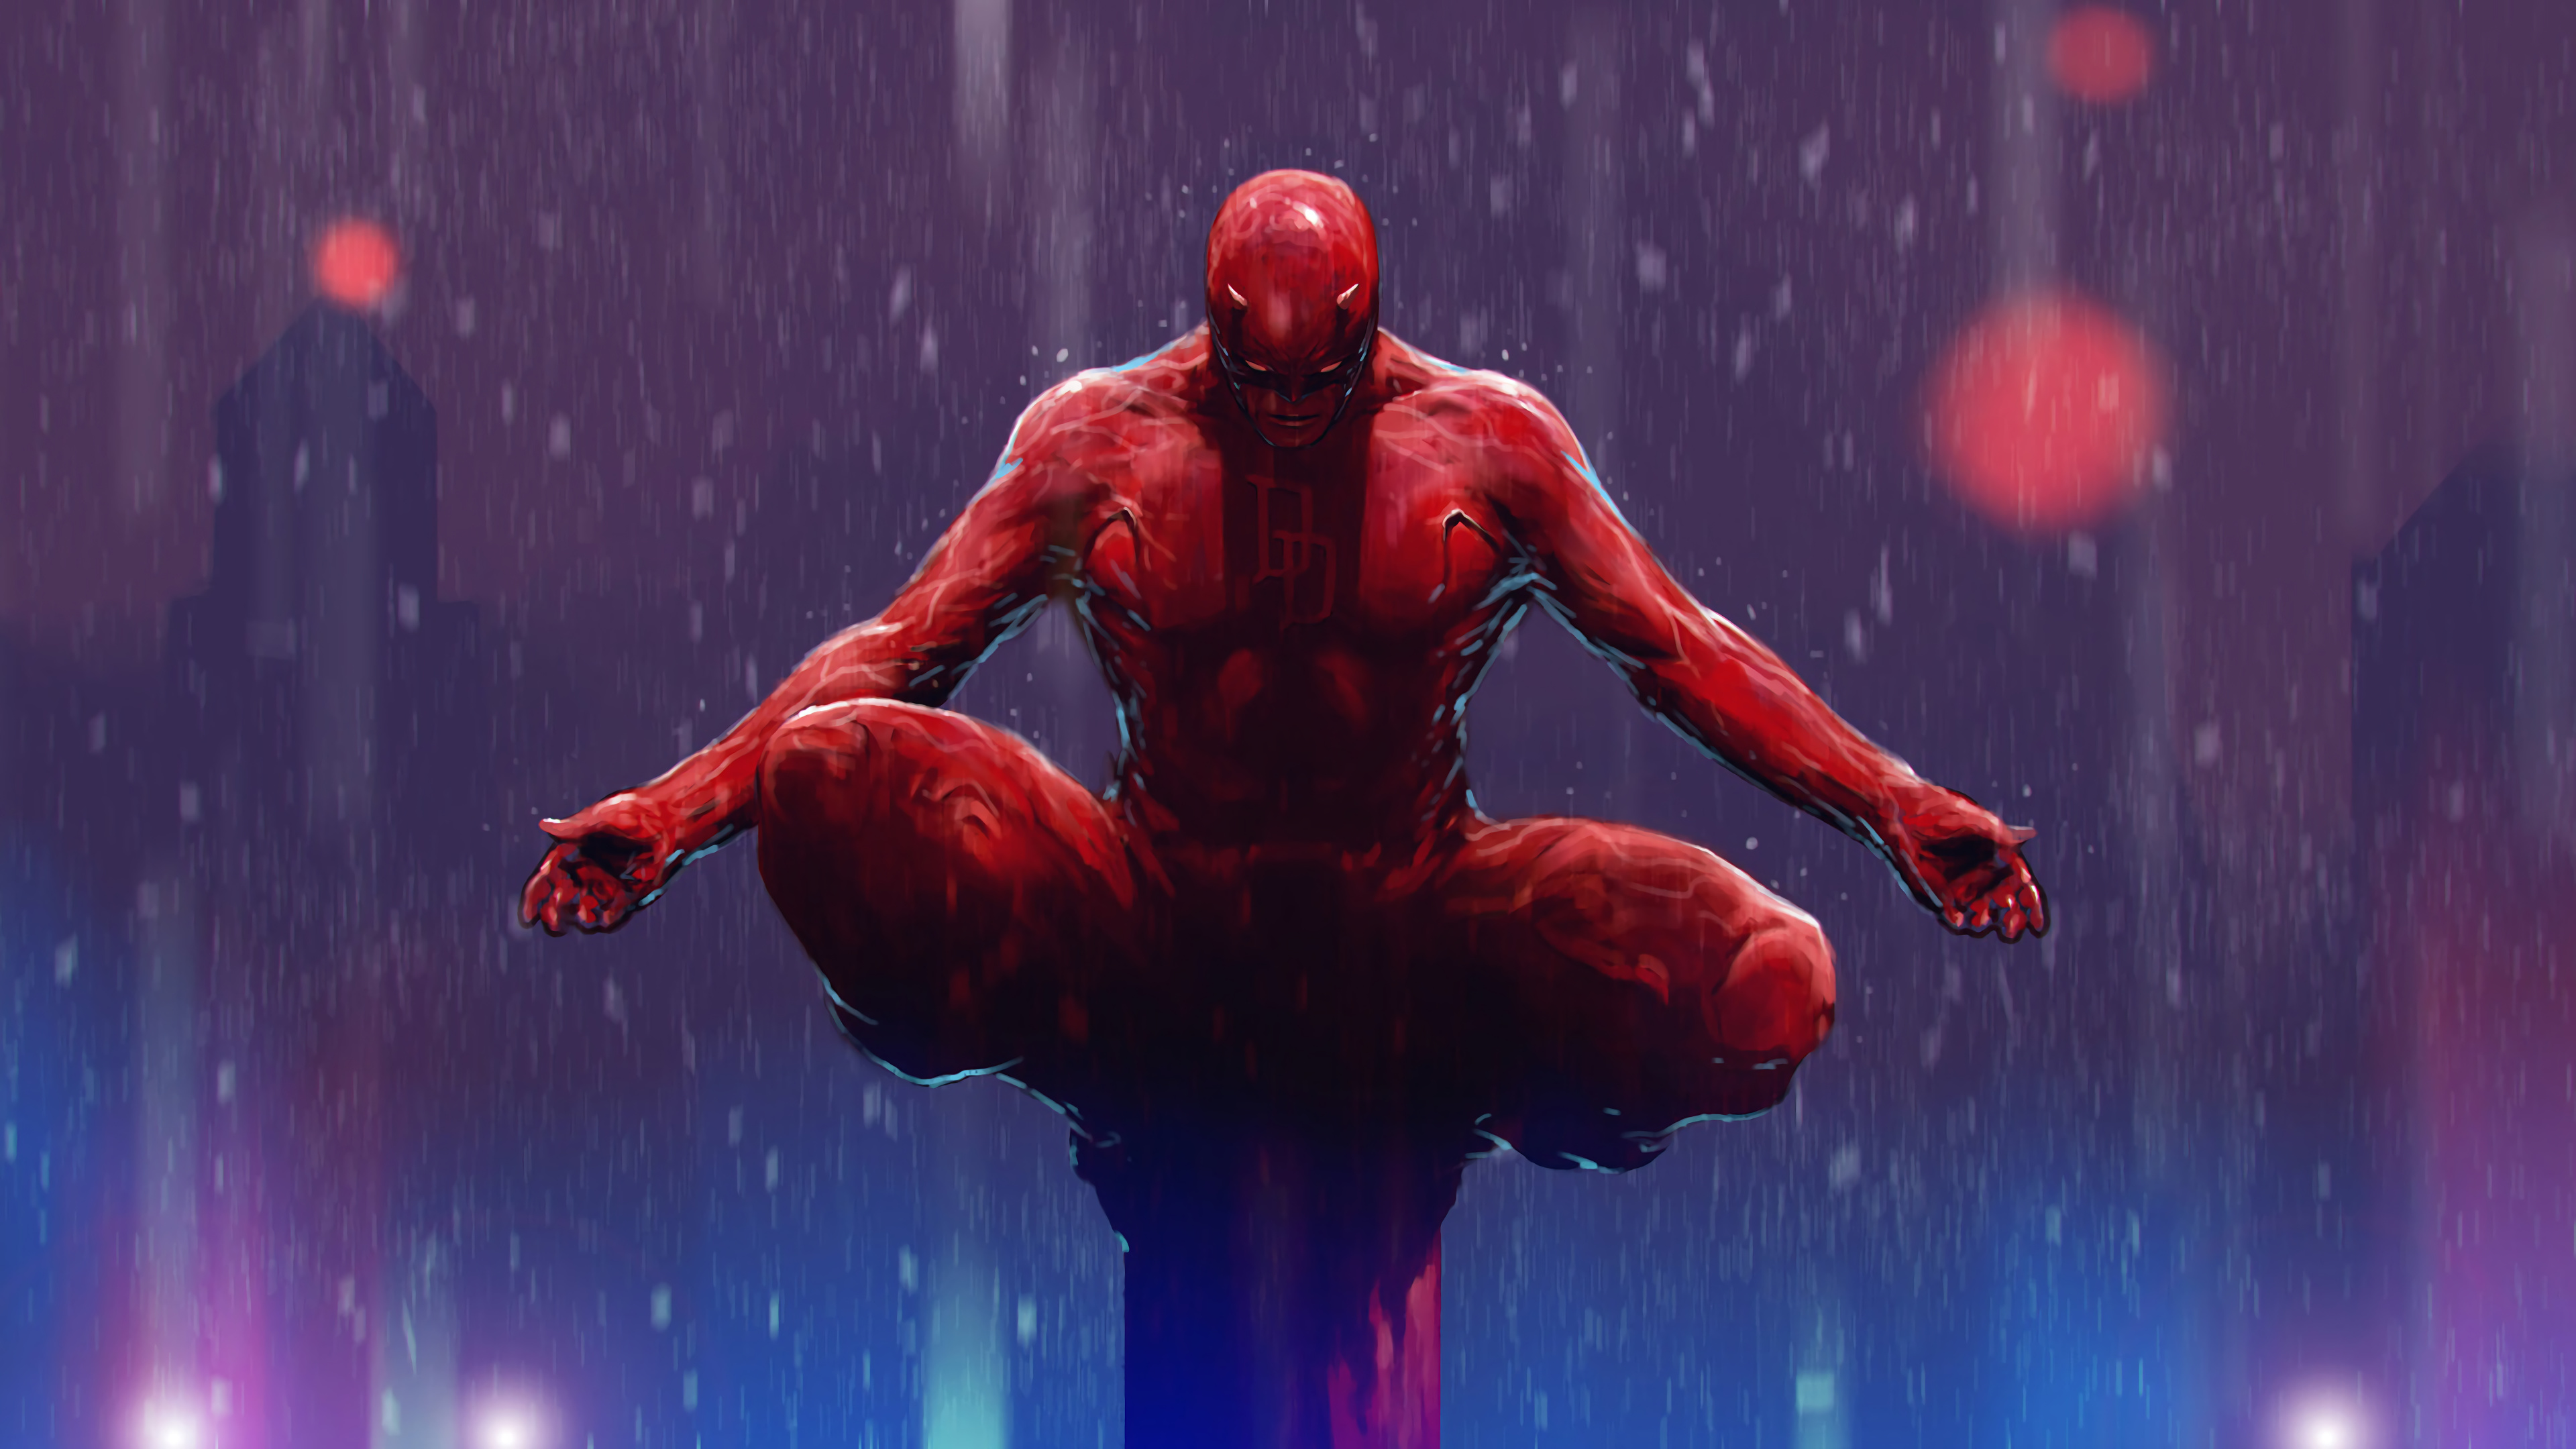 HD wallpaper featuring Daredevil in a meditative pose against a moody, rainy backdrop, perfect for desktop background use.